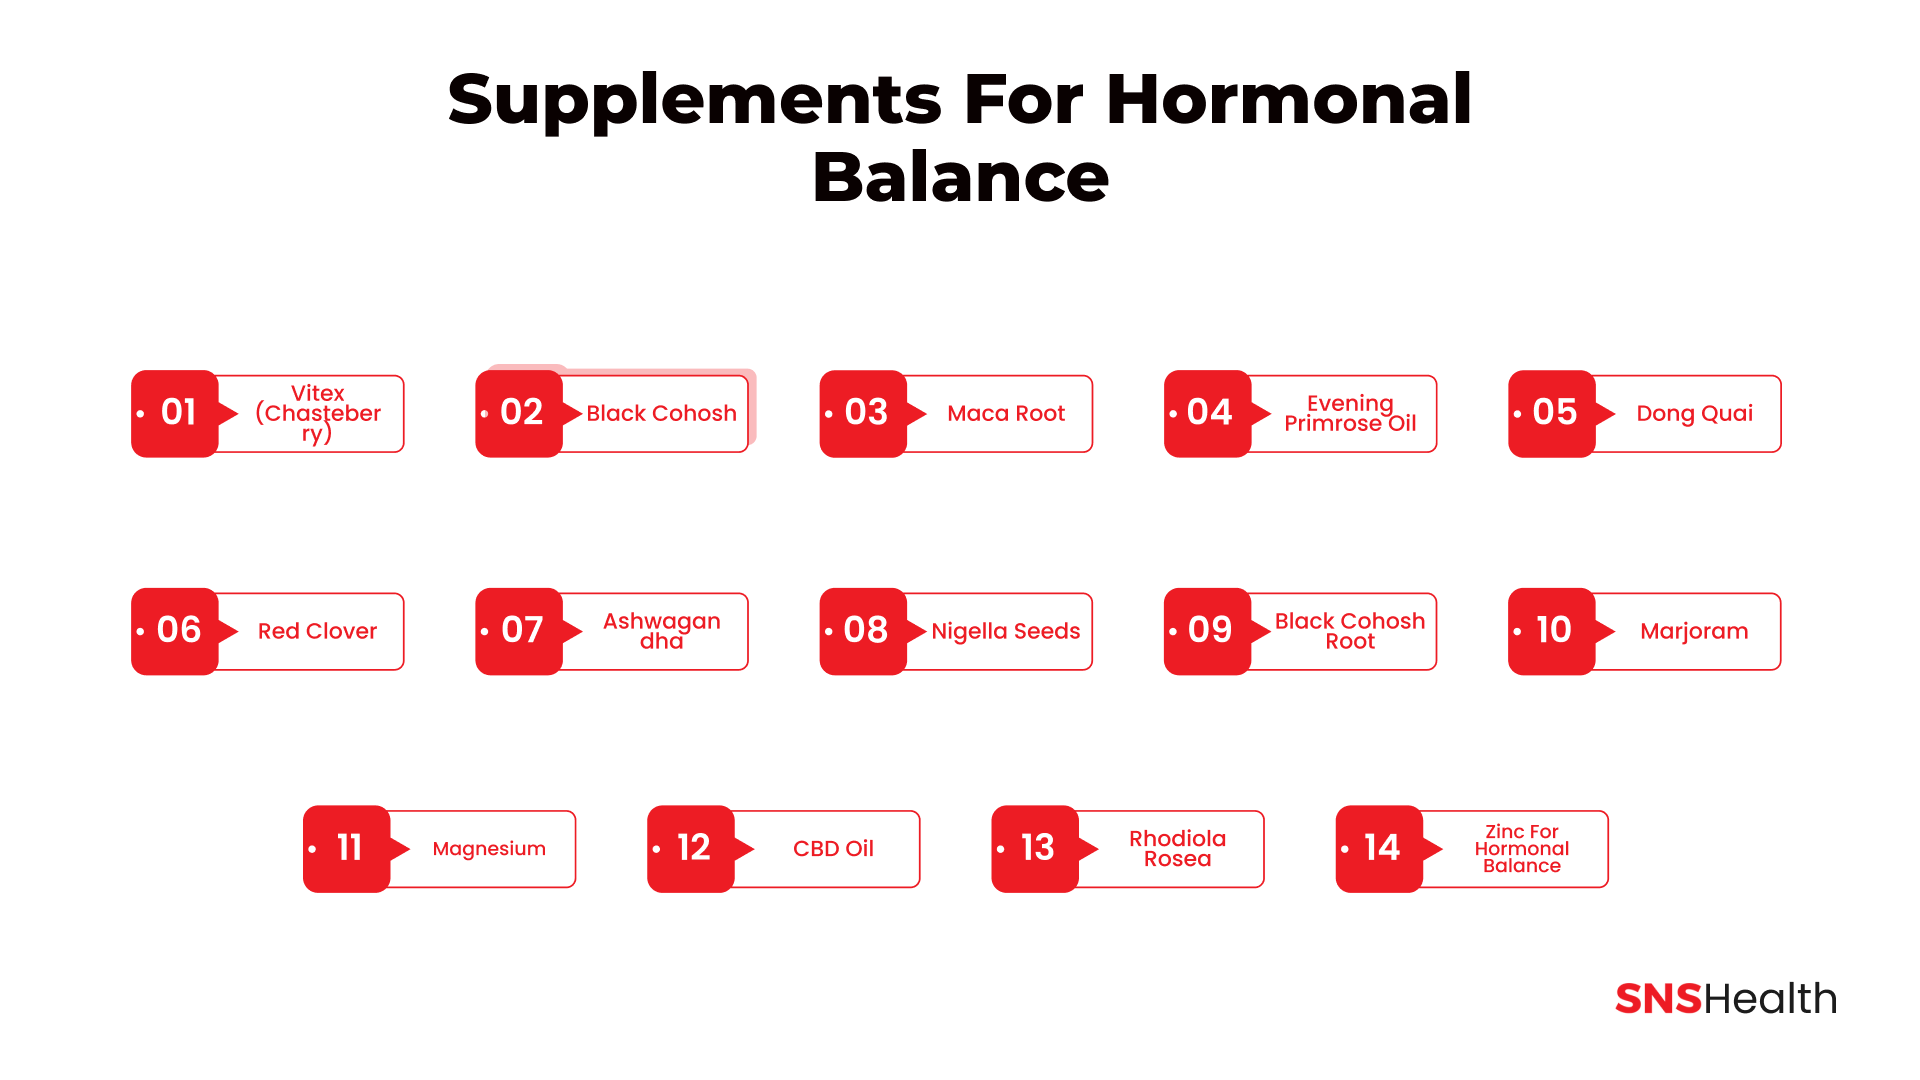 Supplements for Hormonal Balance